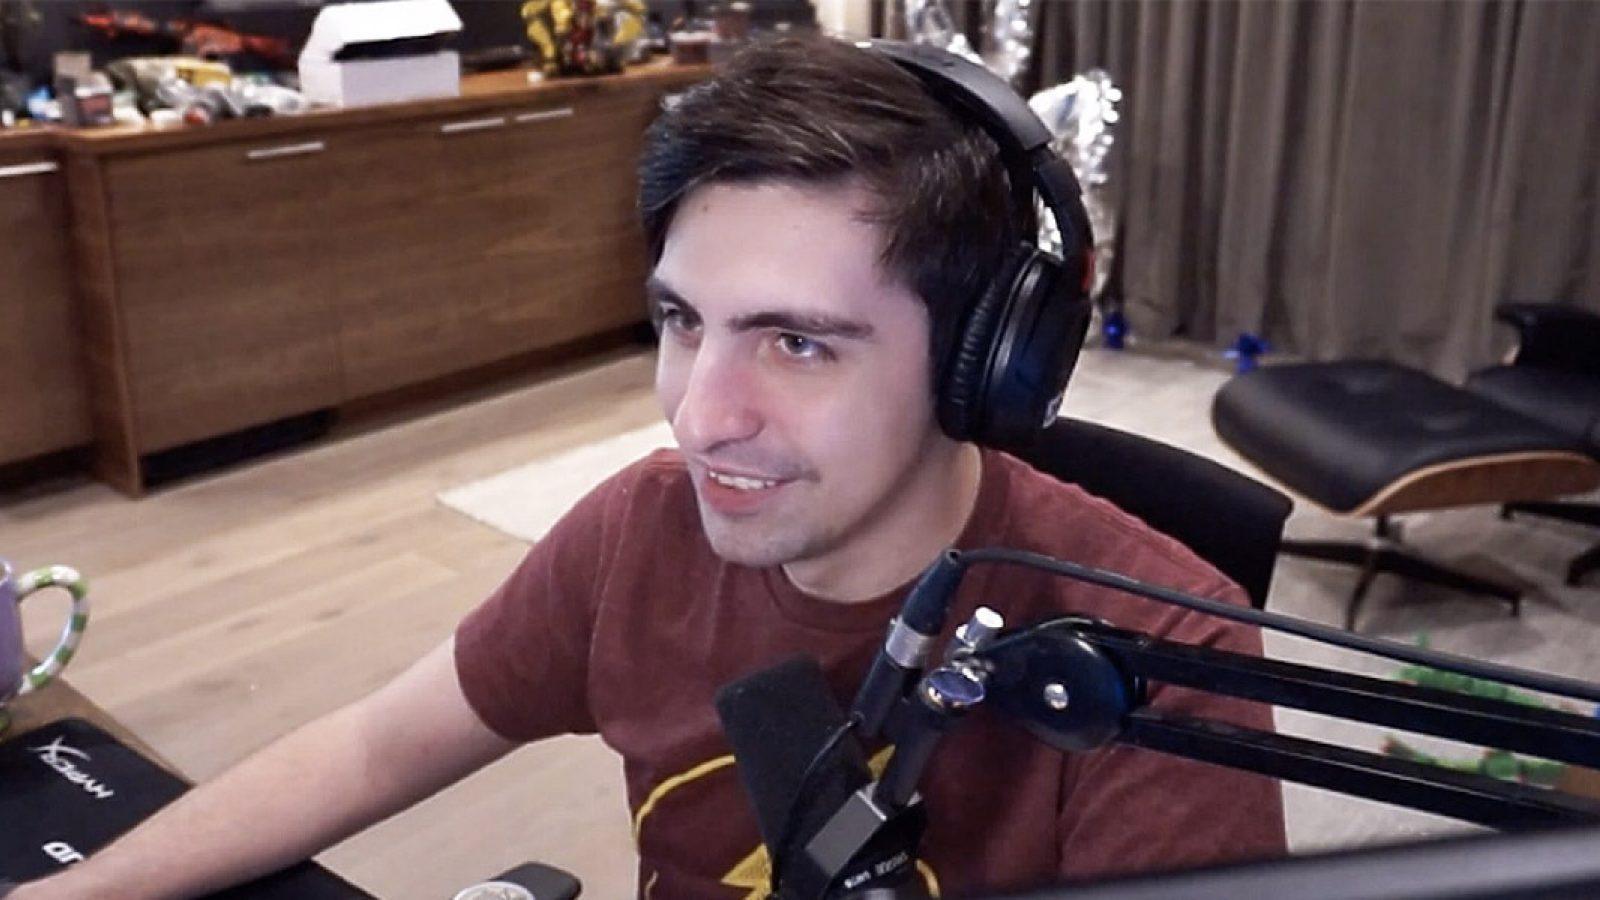 An image of Shroud smiling while streaming